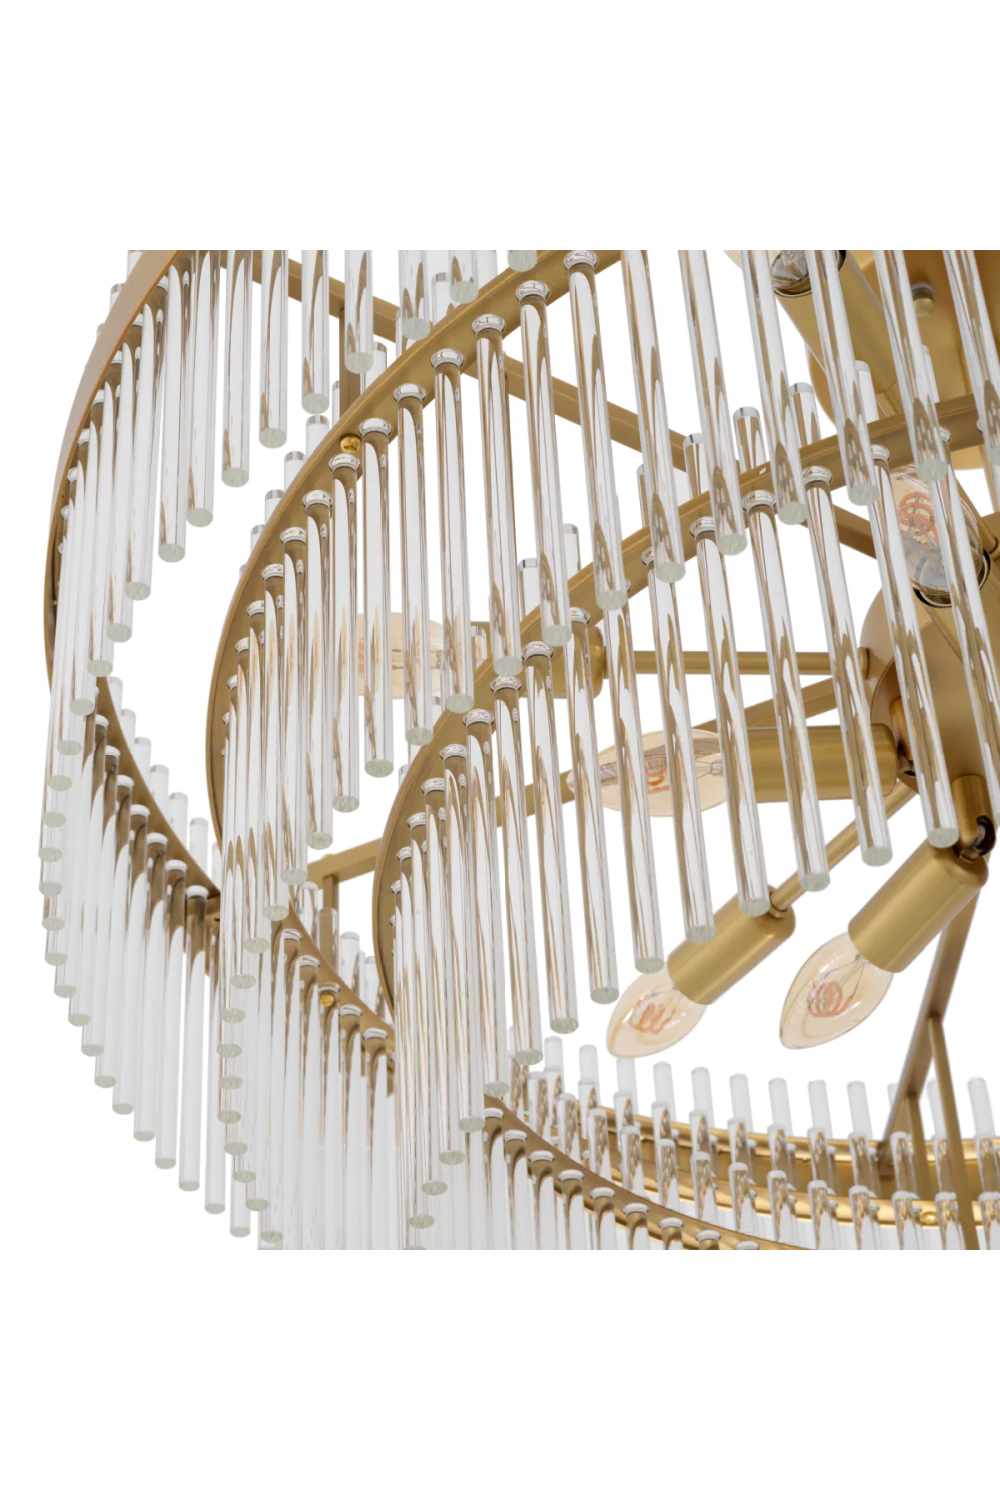 Glass Rods Tiered Ceiling Lamp | Eichholtz East | Oroa.com